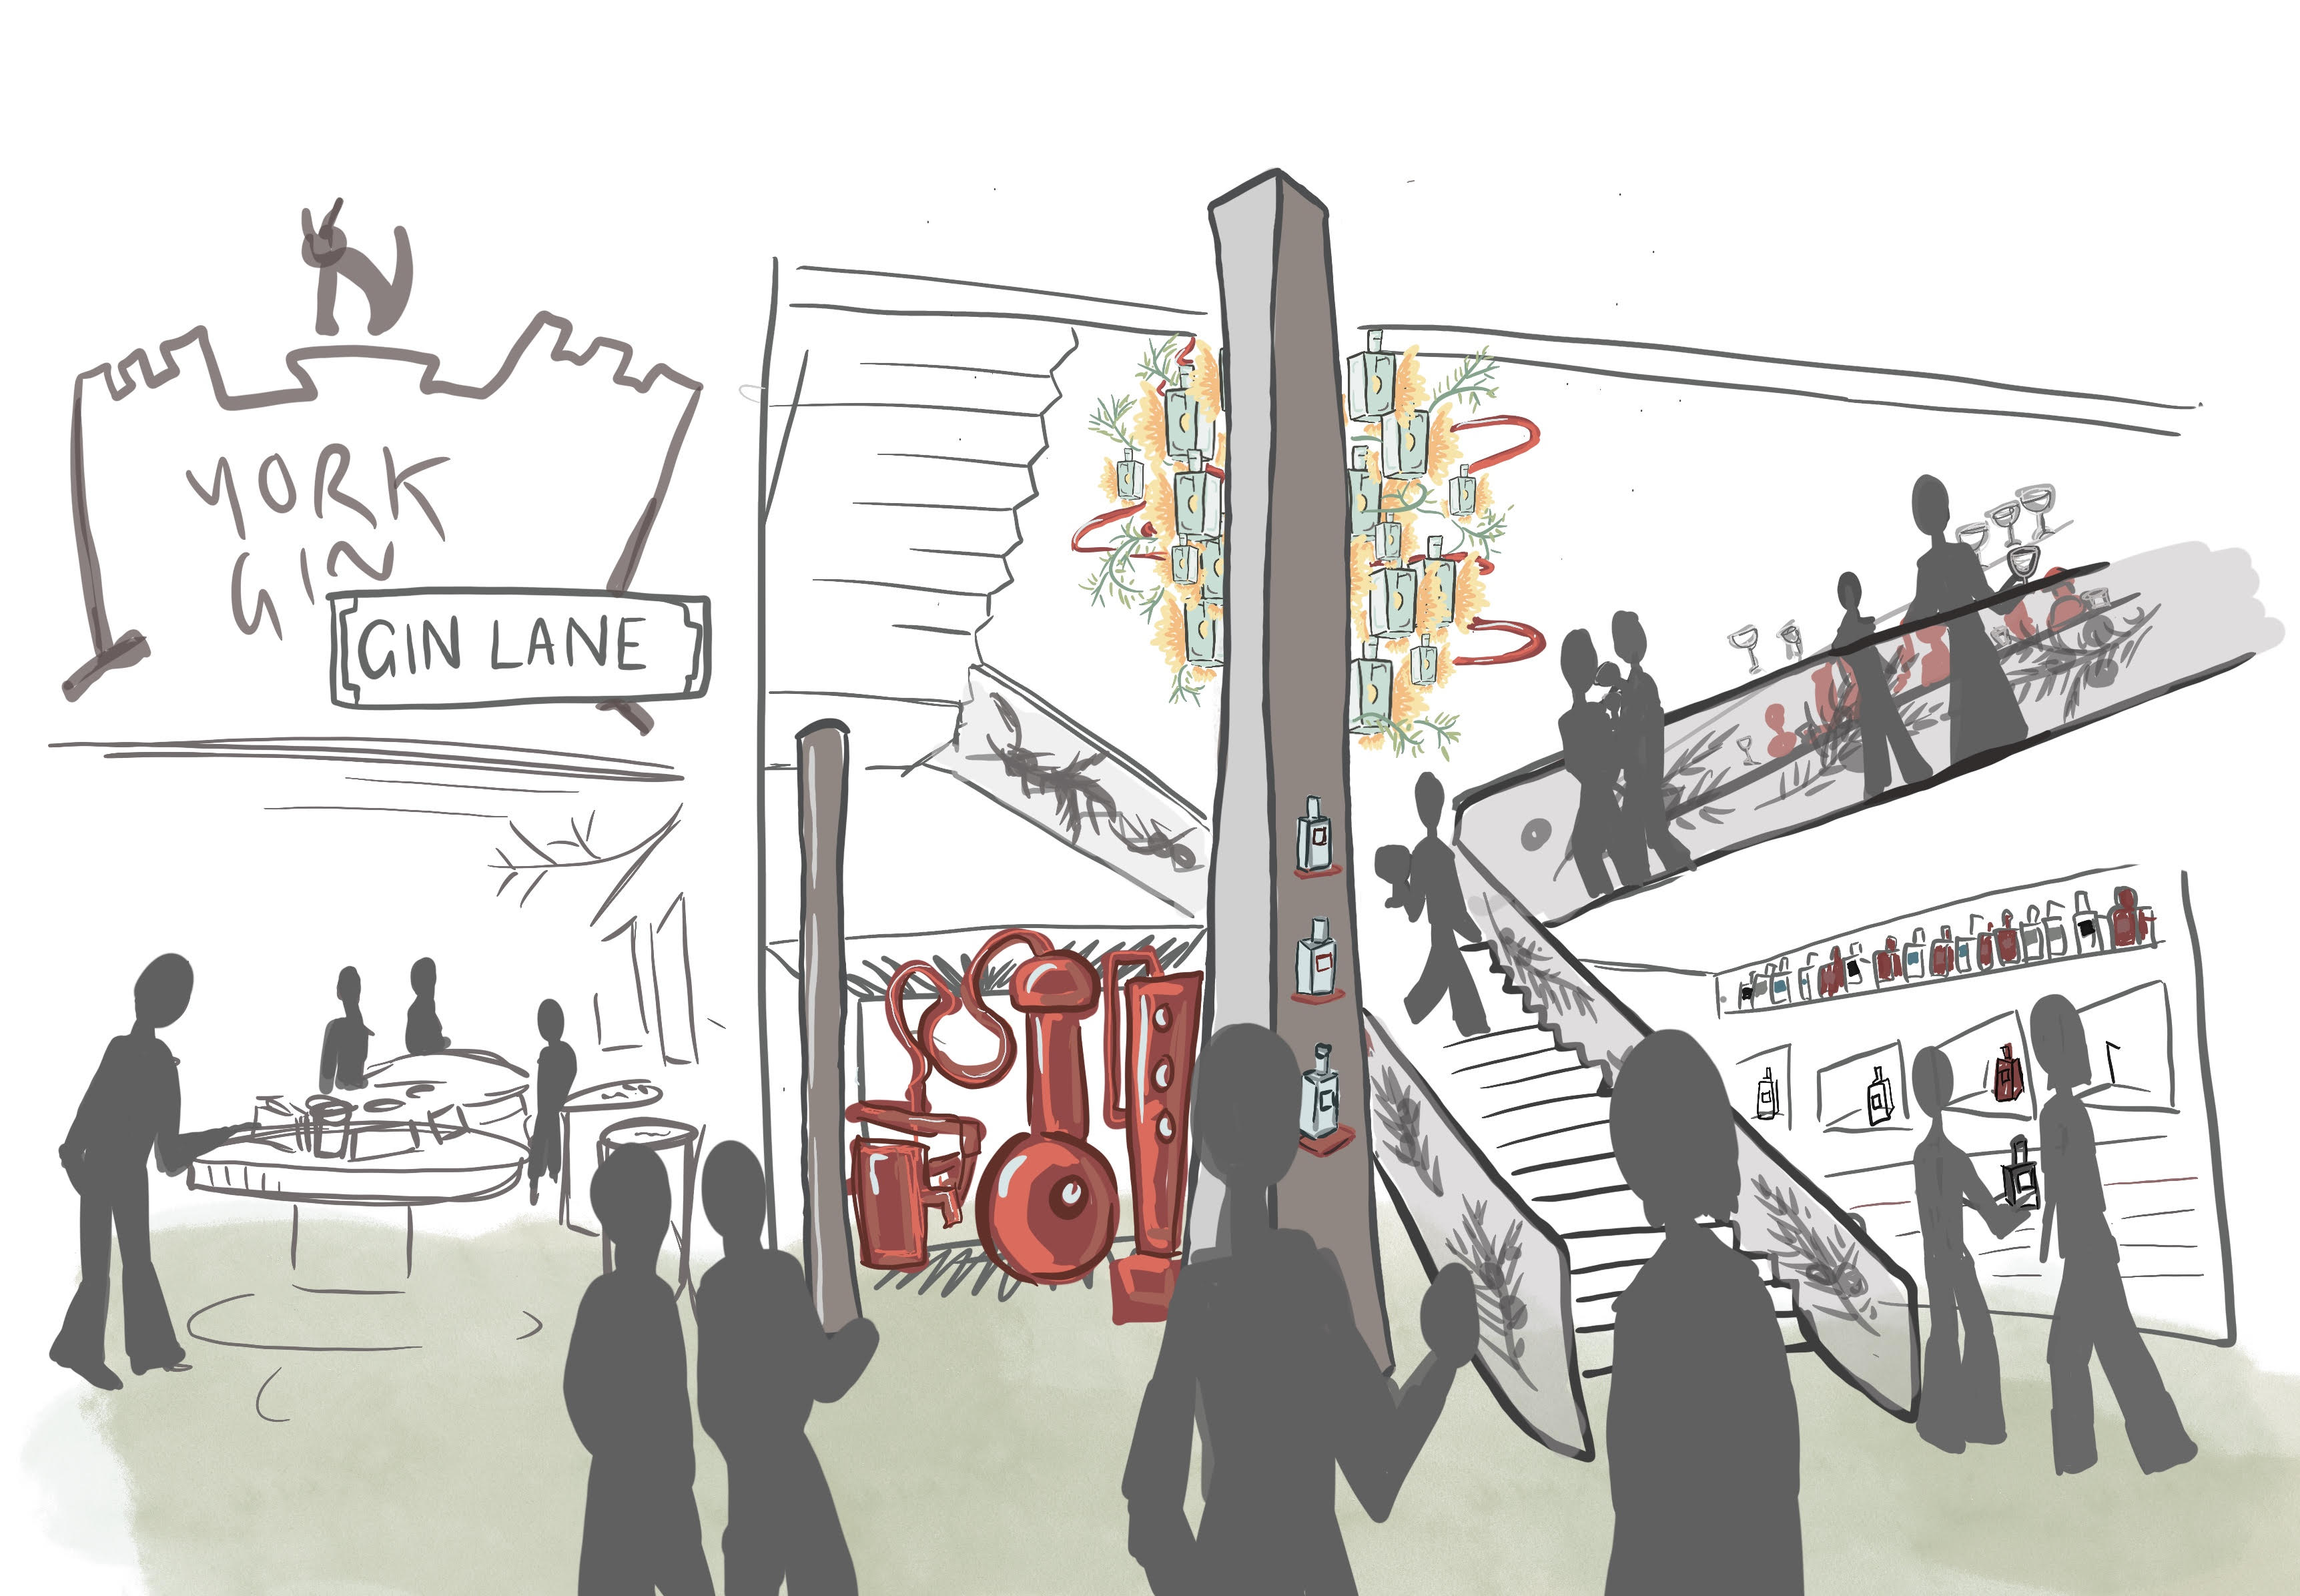 An artist's impression of the New York Gin distillery and visitor attraction in York